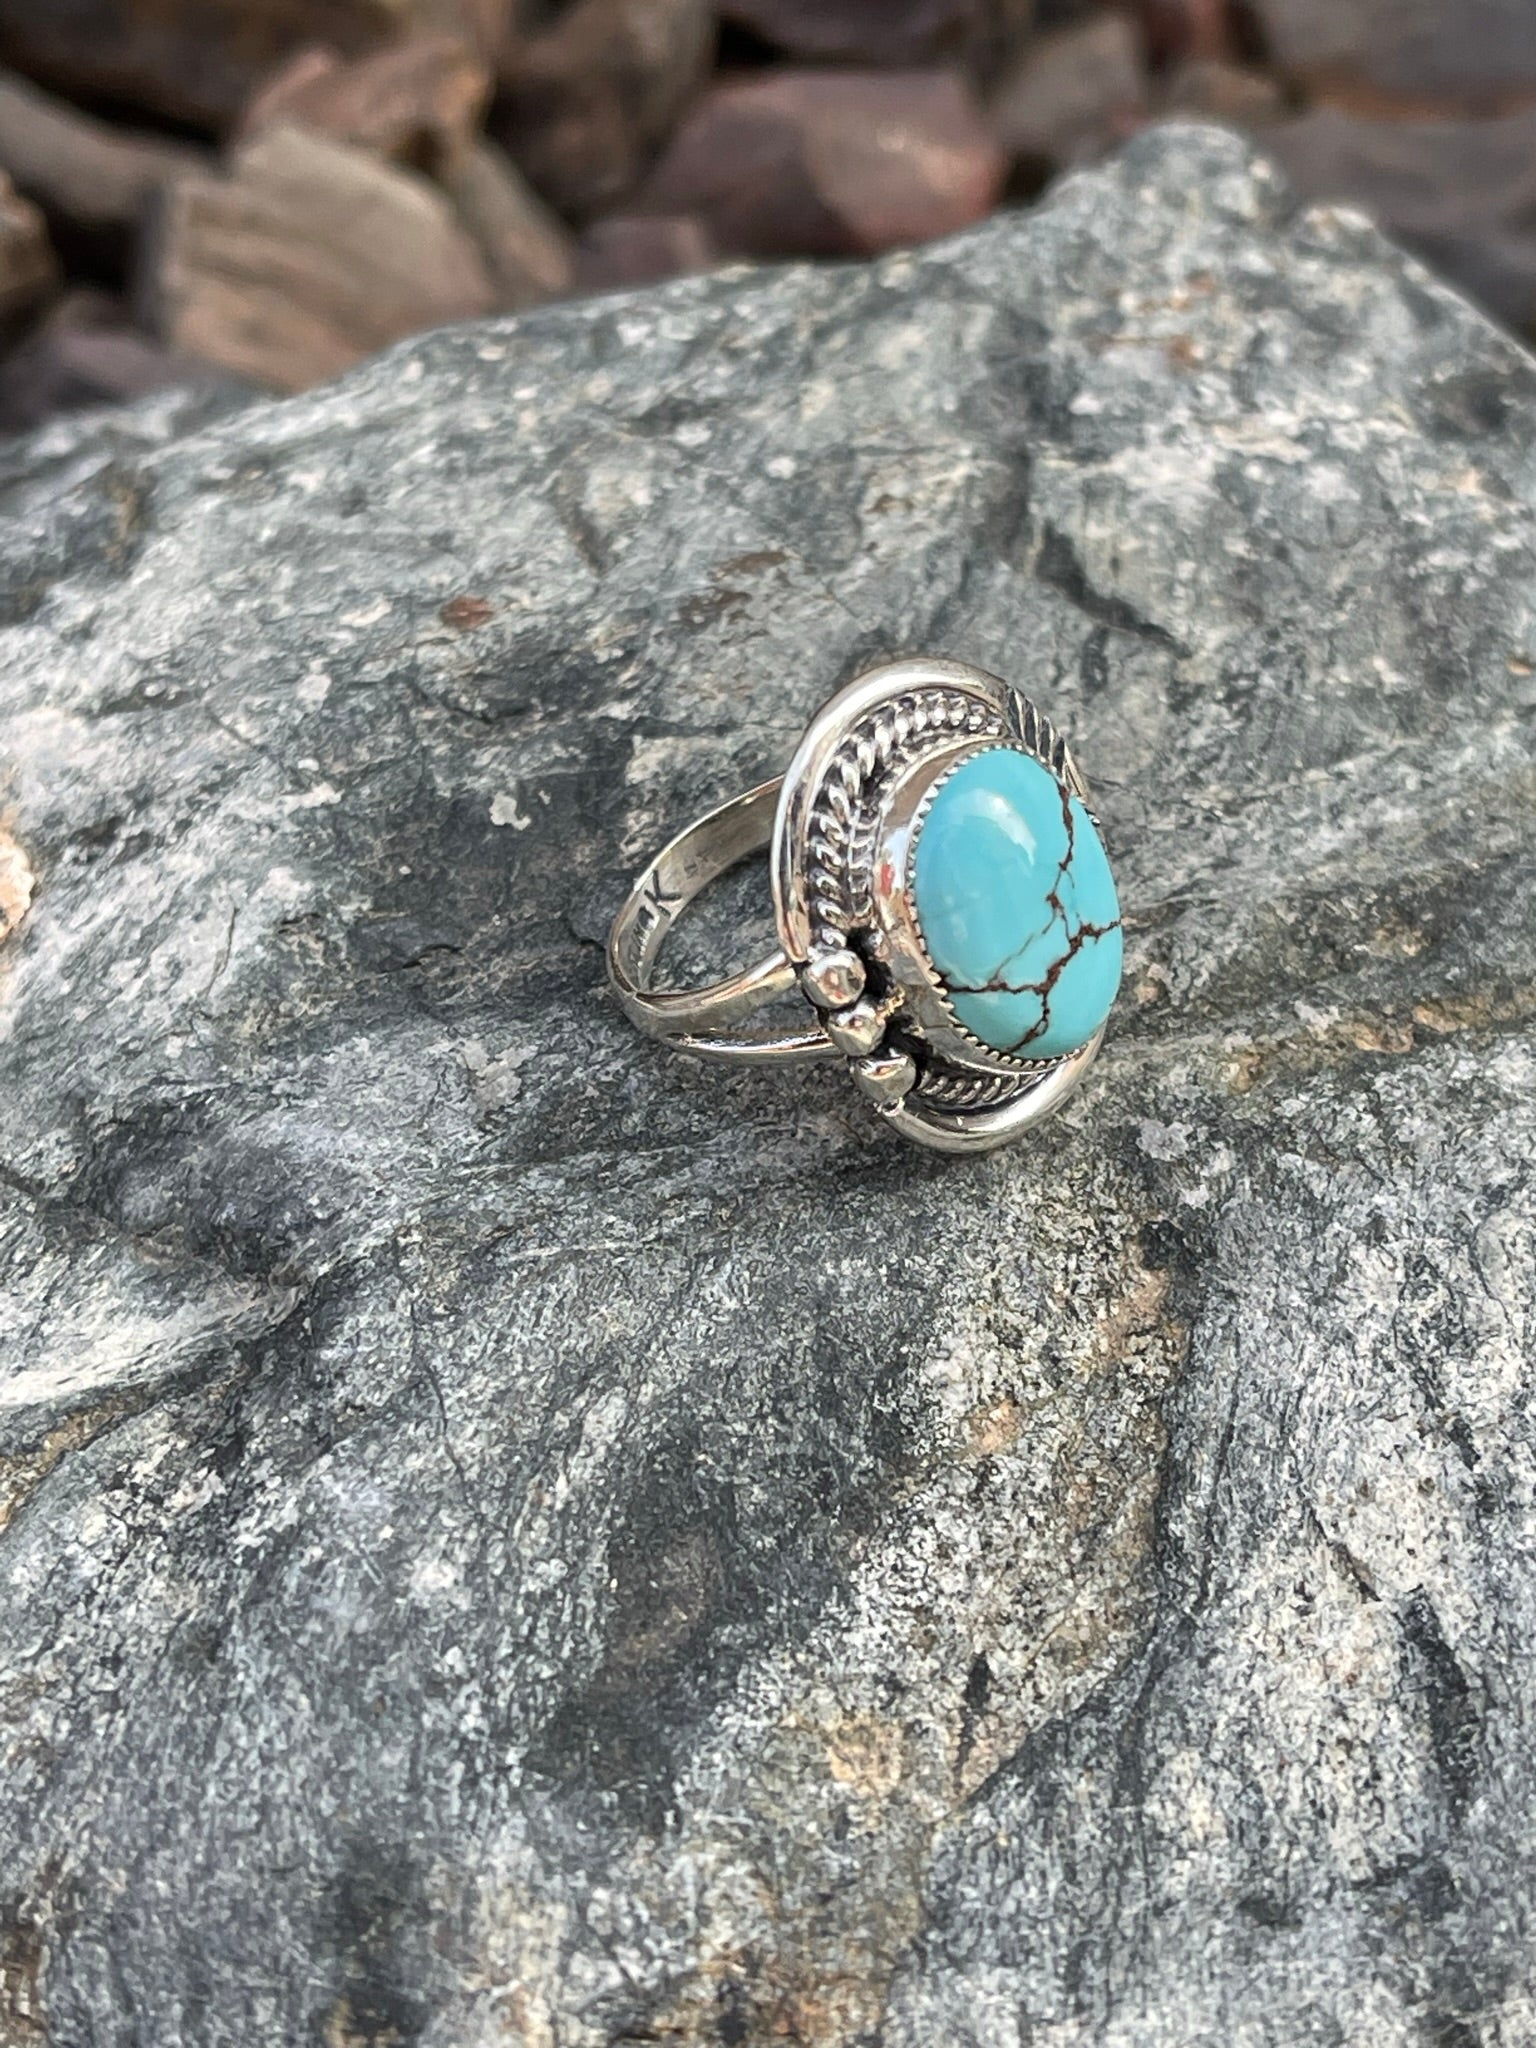 Handmade Solid Sterling Silver Number Eight Turquoise Ring with Twist Trim - Size 5 1/2